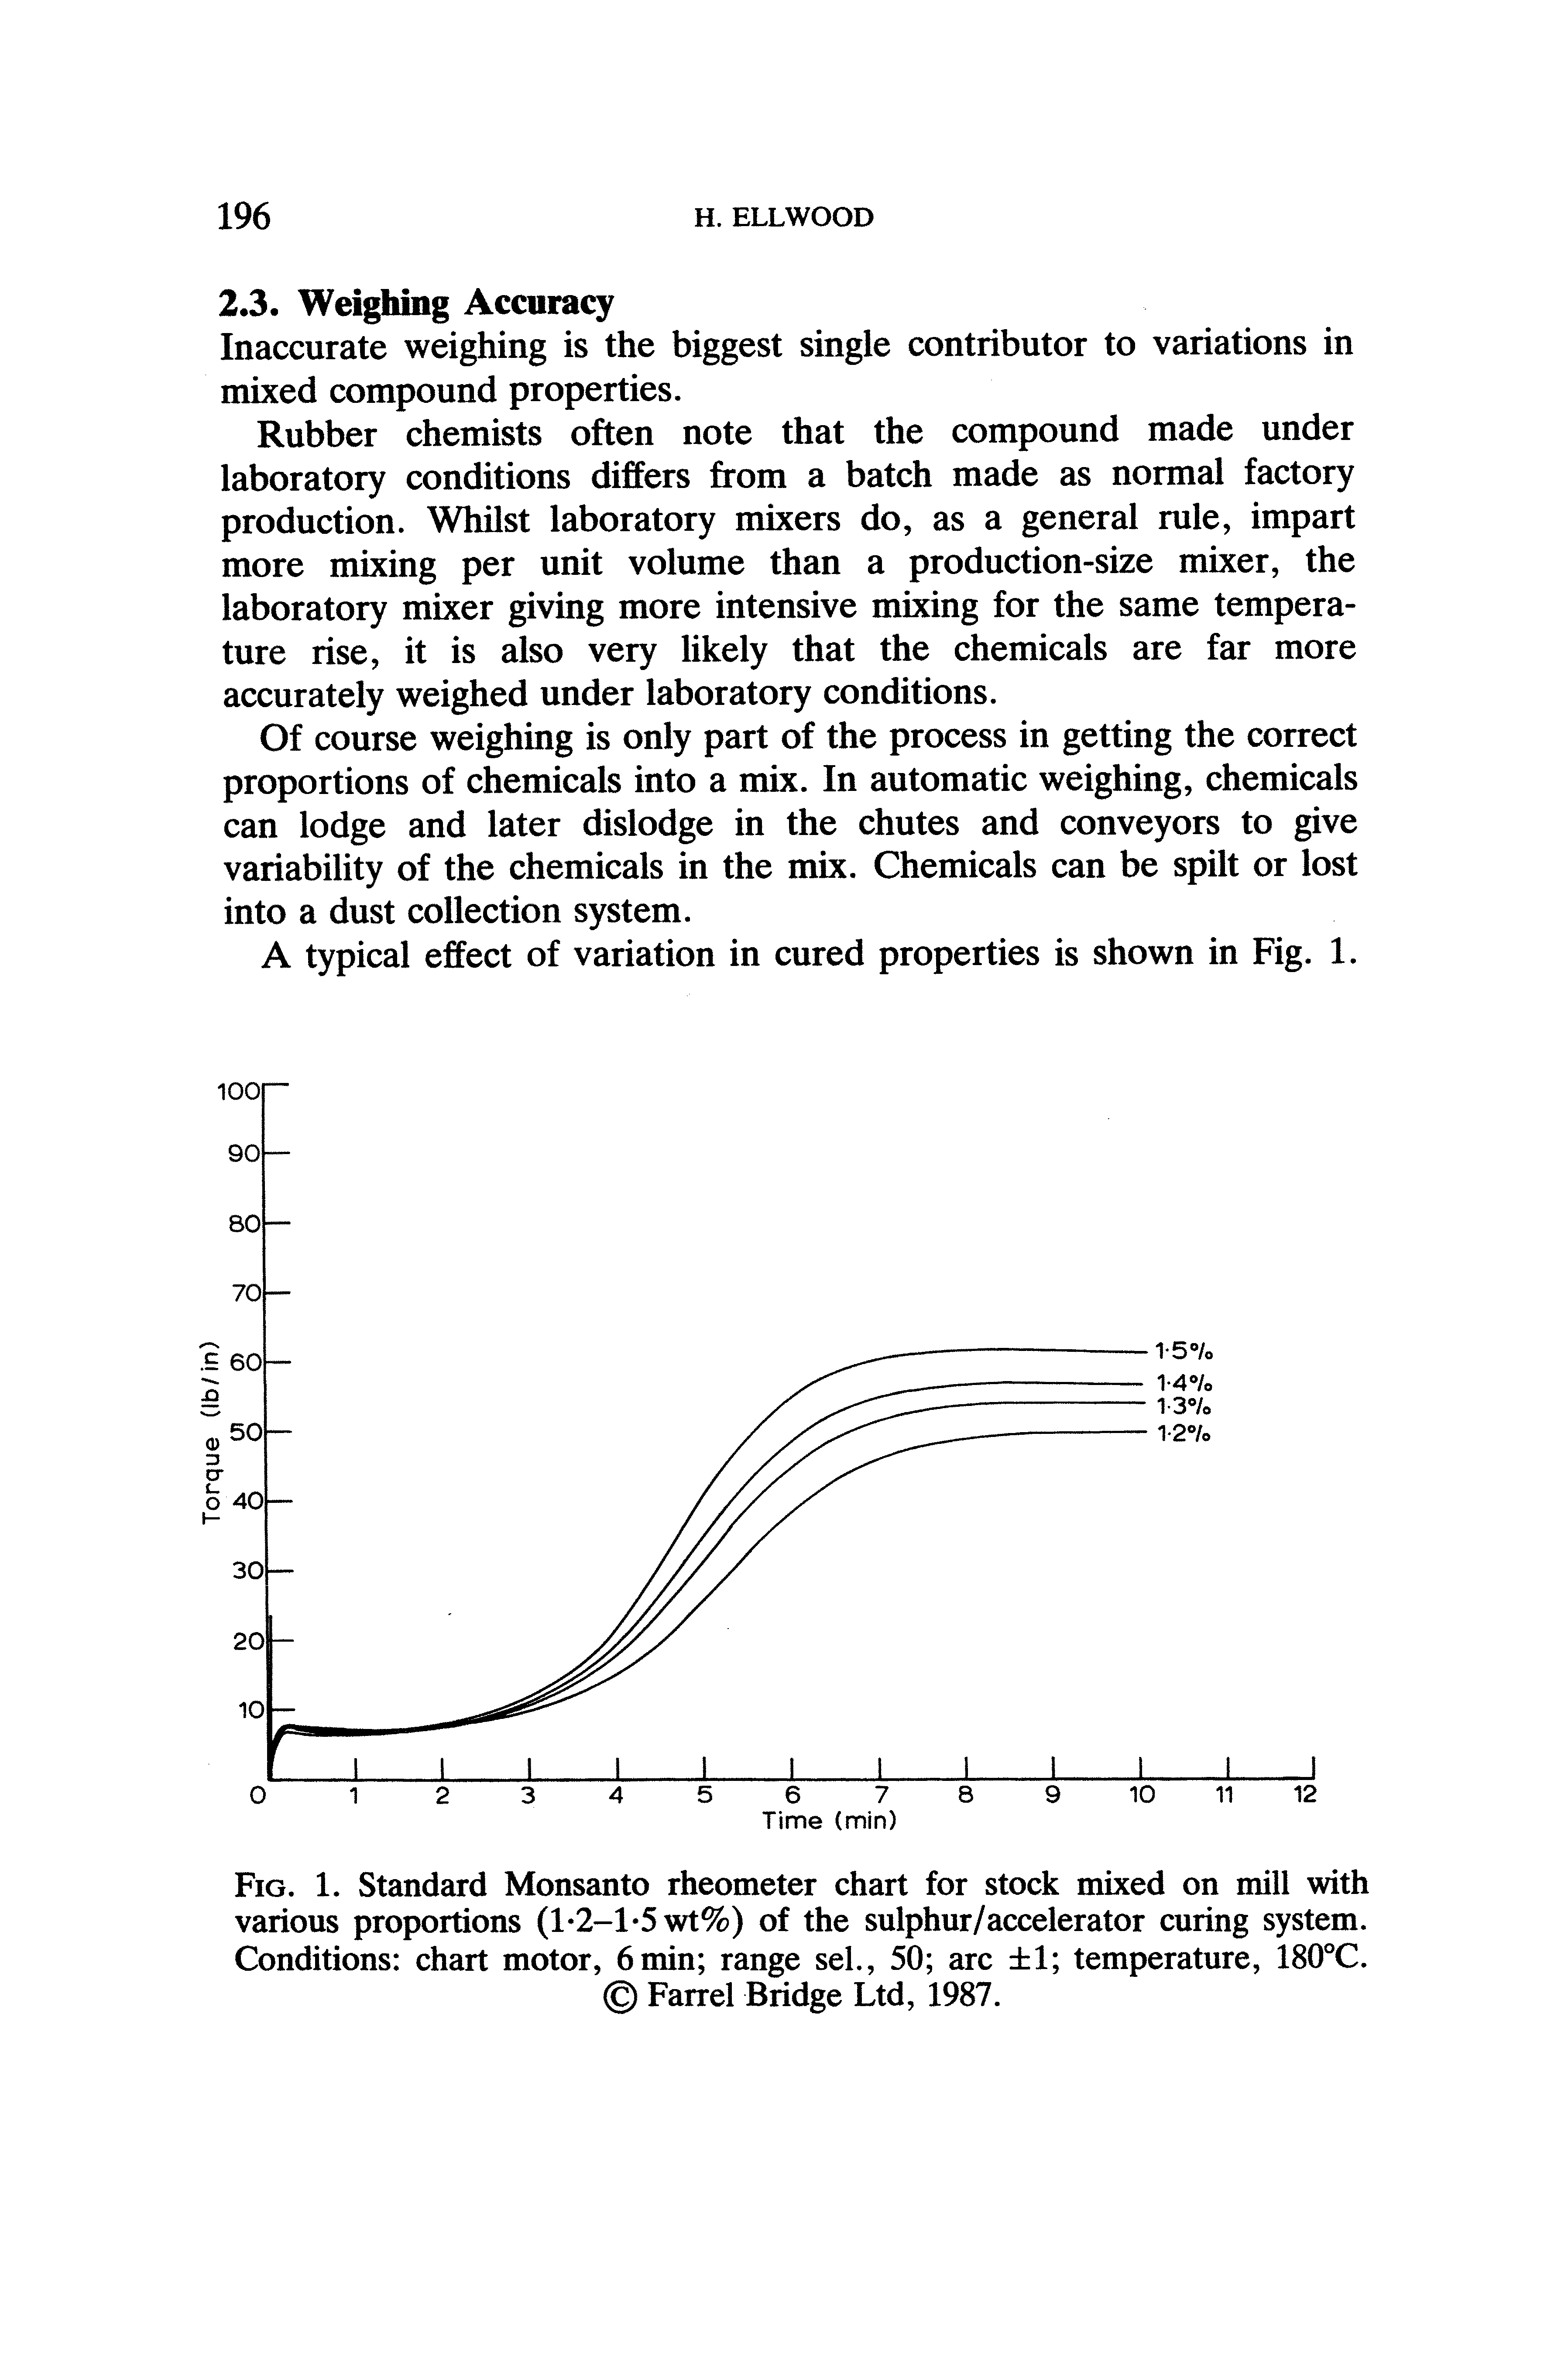 Fig. 1. Standard Monsanto rheometer chart for stock mixed on mill with various proportions (l-2-l-5wt%) of the sulphur/accelerator curing system. Conditions chart motor, 6 min range sel., 50 arc 1 temperature, 180°C. Parrel Bridge Ltd, 1987.